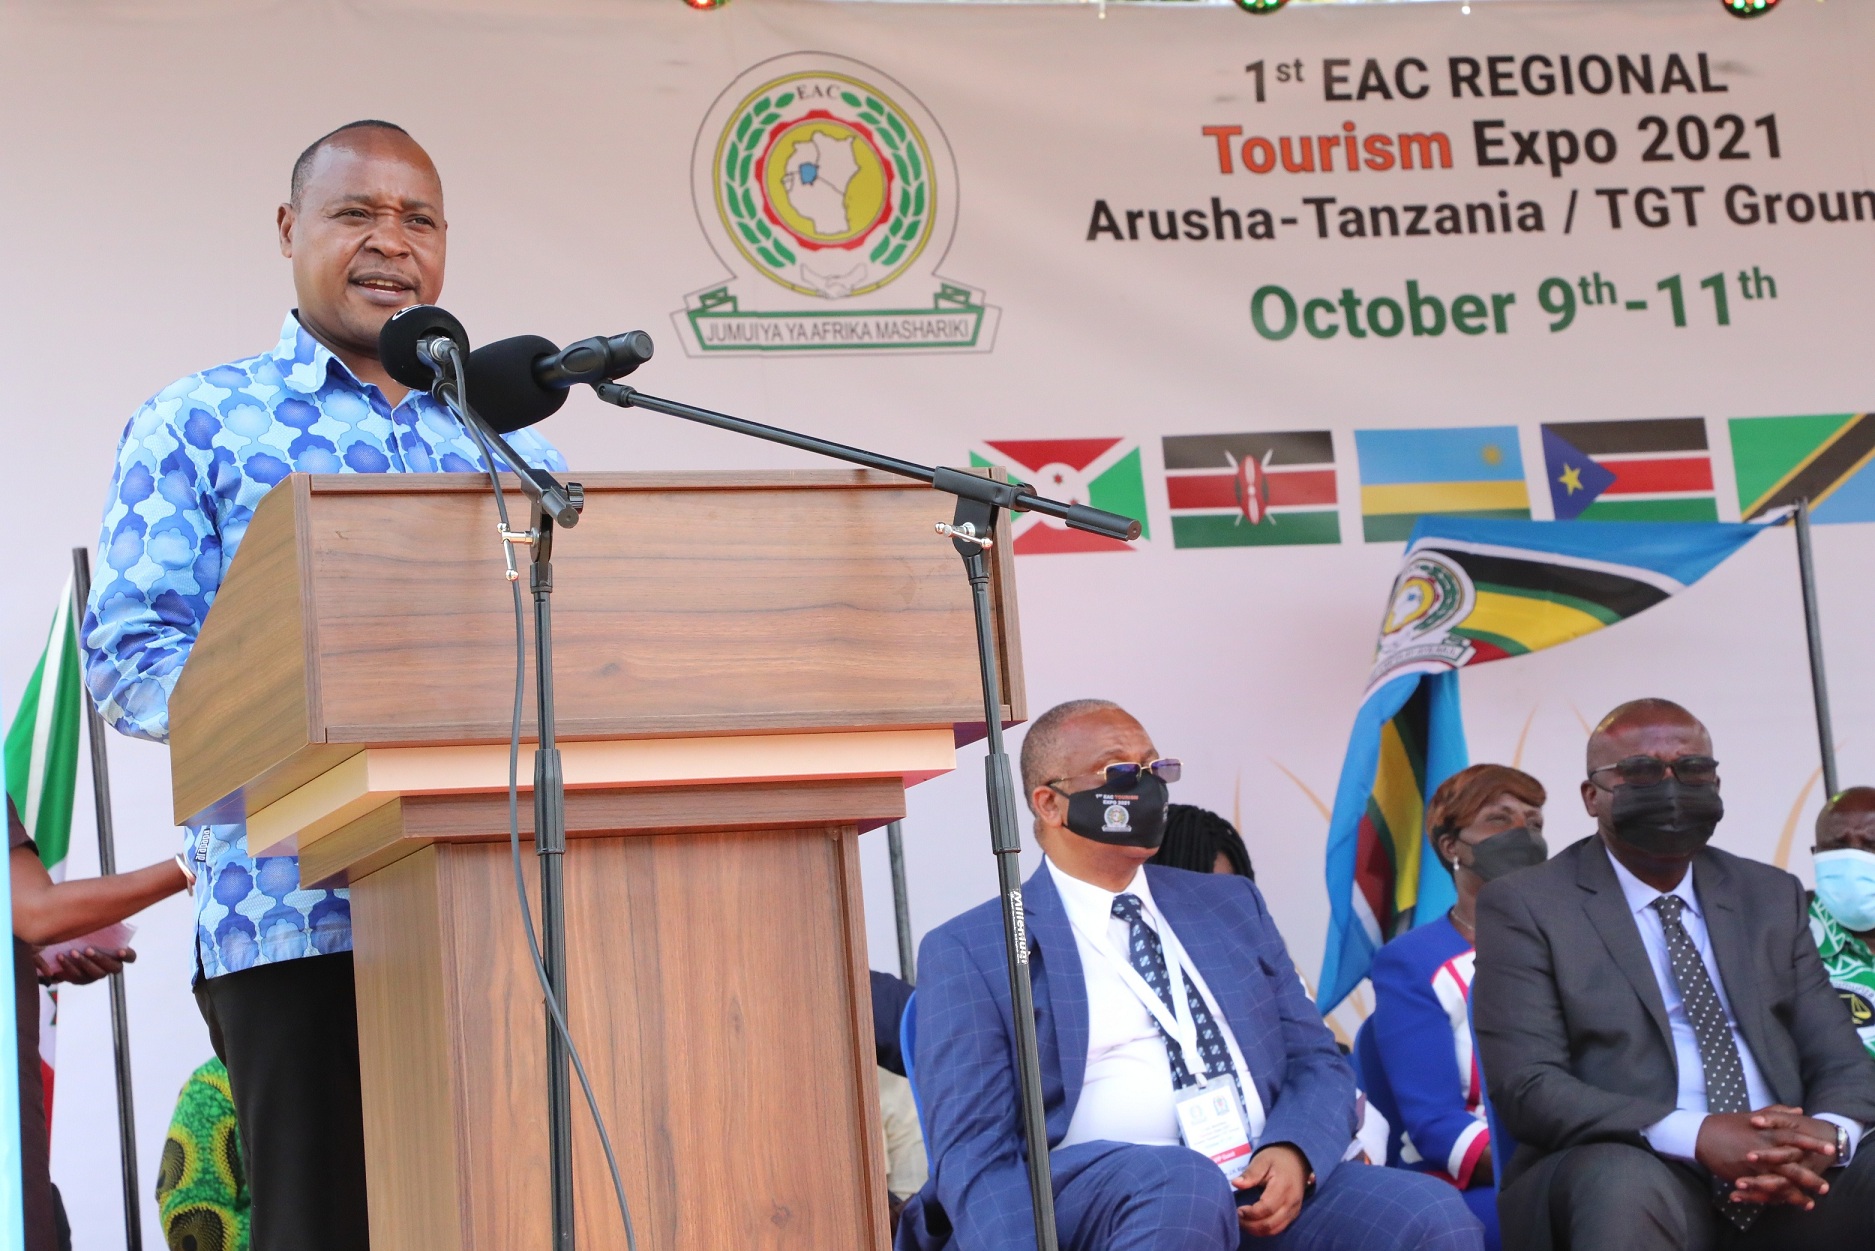 EAC Secretary General Hon. (Dr.) Peter Mathuki addresses guests and exhibitors when he officiated over the official opening of the 1st EAC Tourism Expo at the TGT Grounds in Arusha, Tanzania.